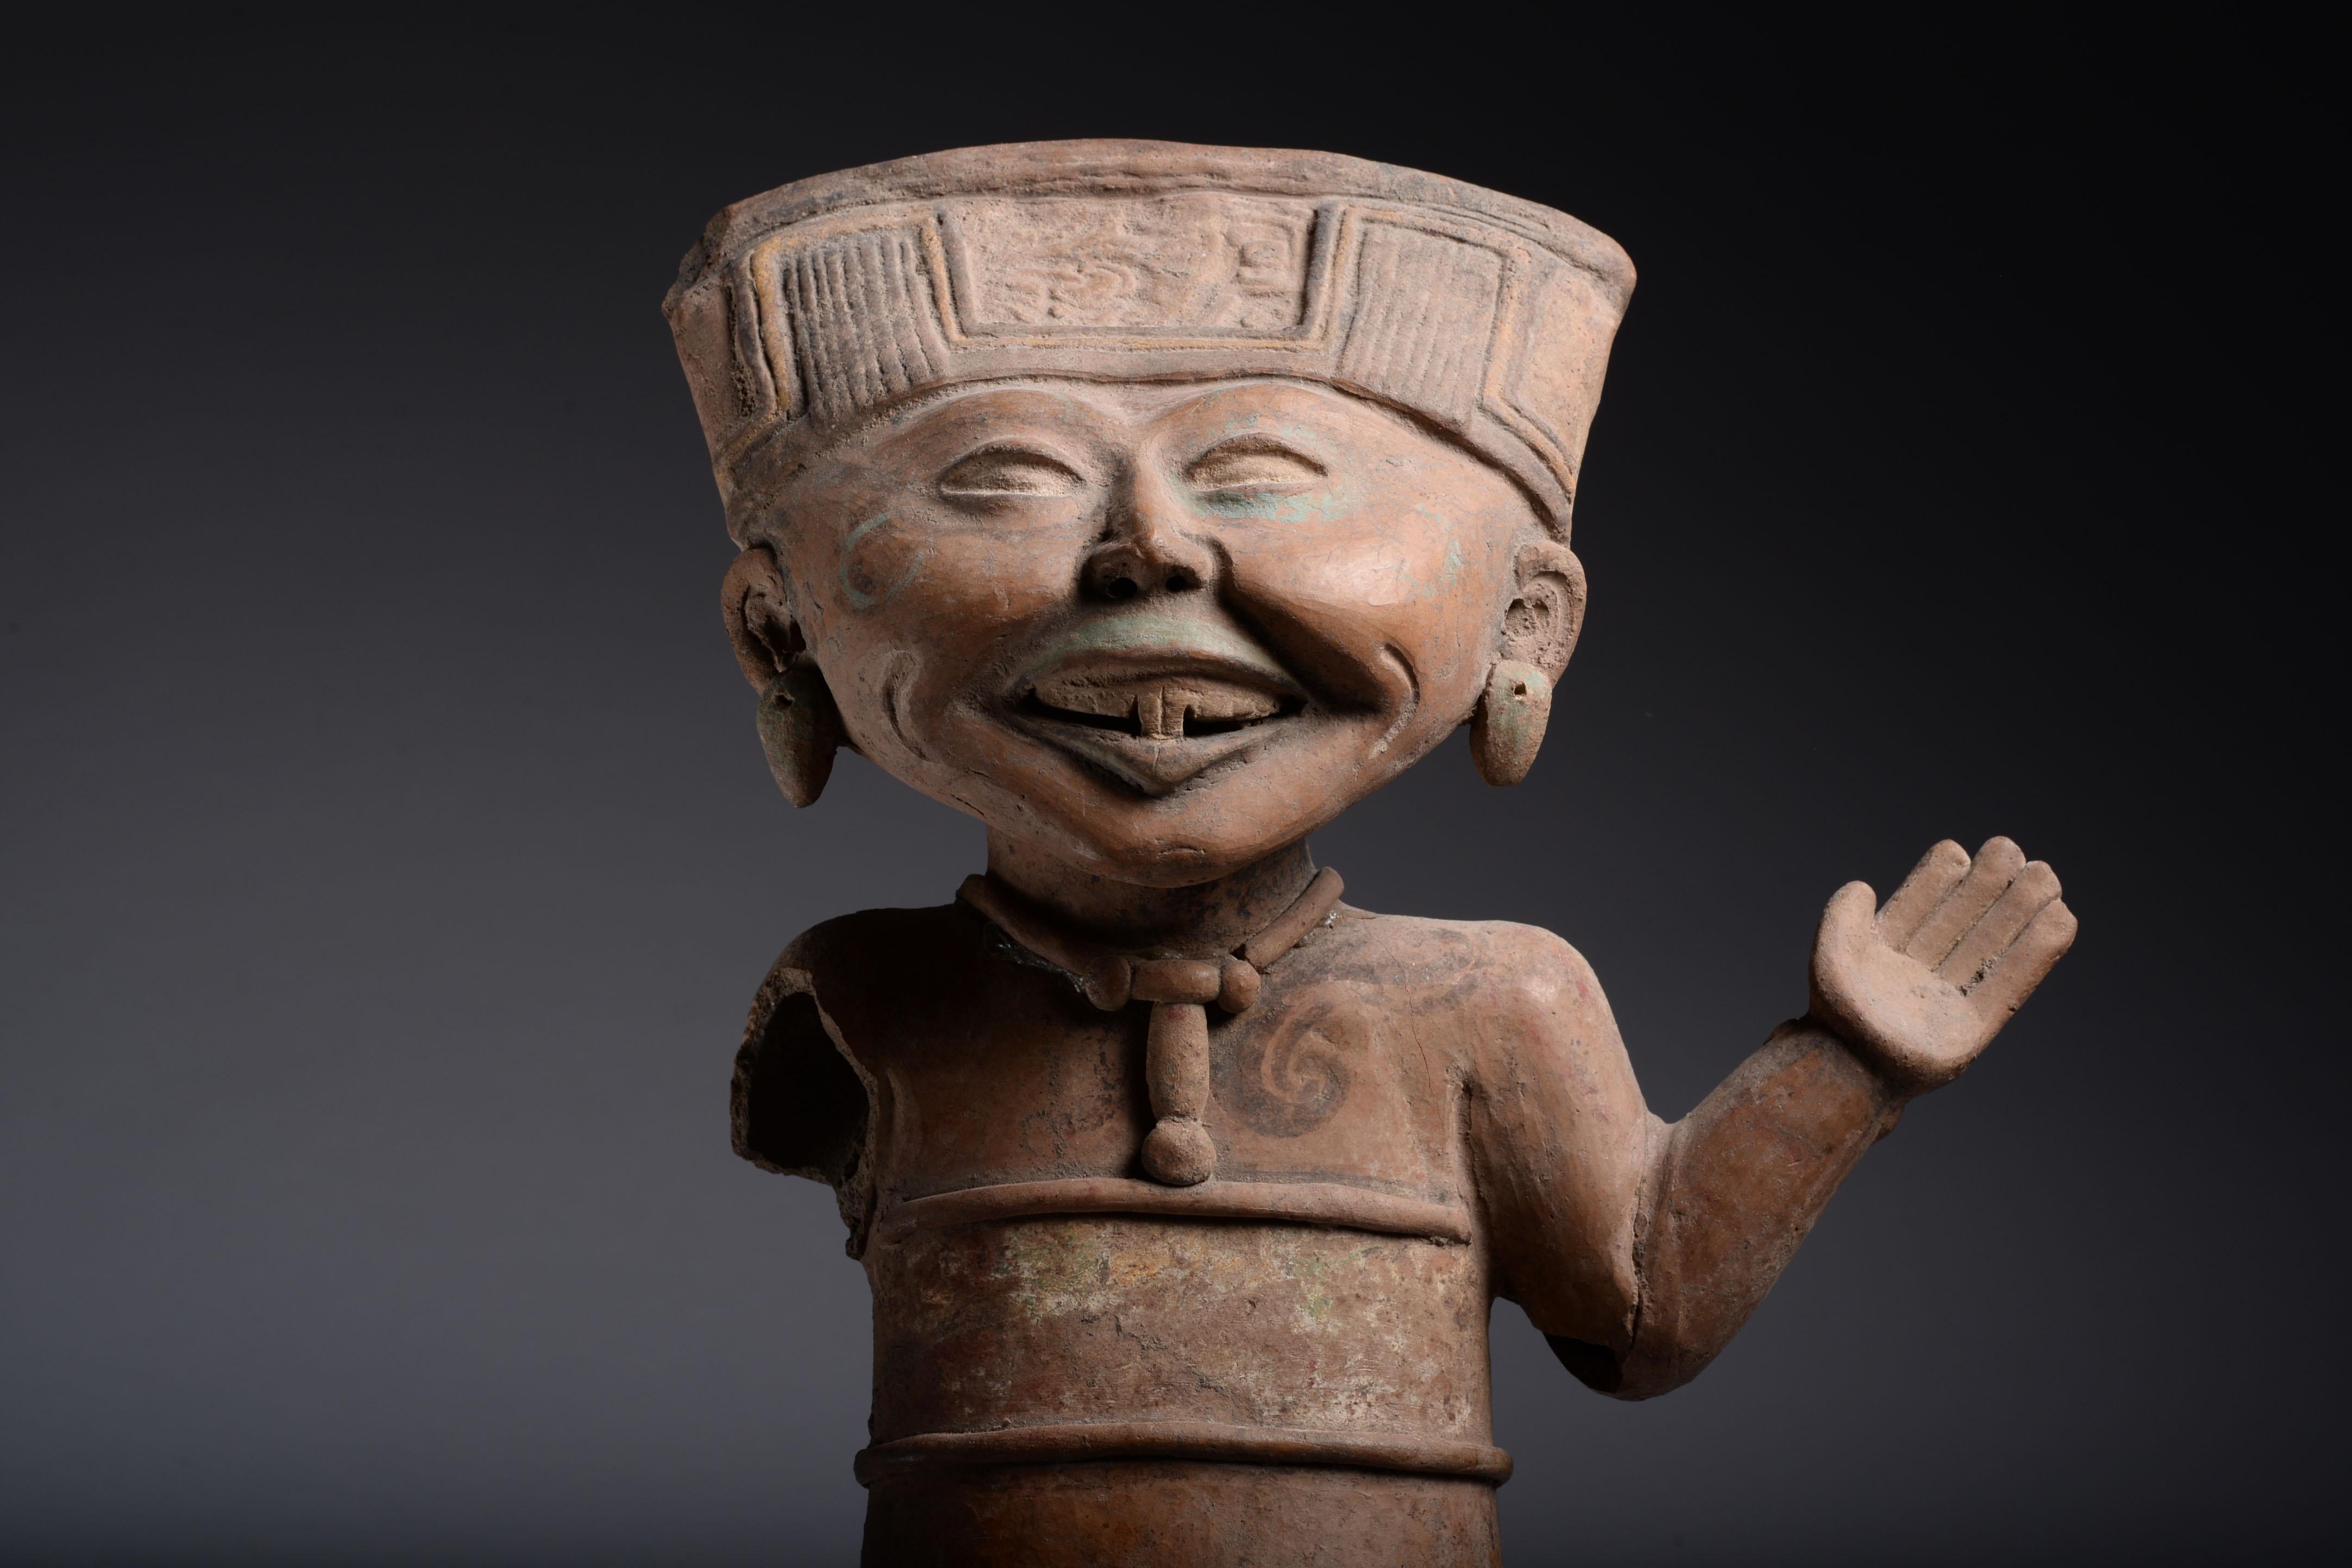 Seeger Collection Ancient Pre-Columbian Pottery Laughing Veracruz Figure, 550 AD 1